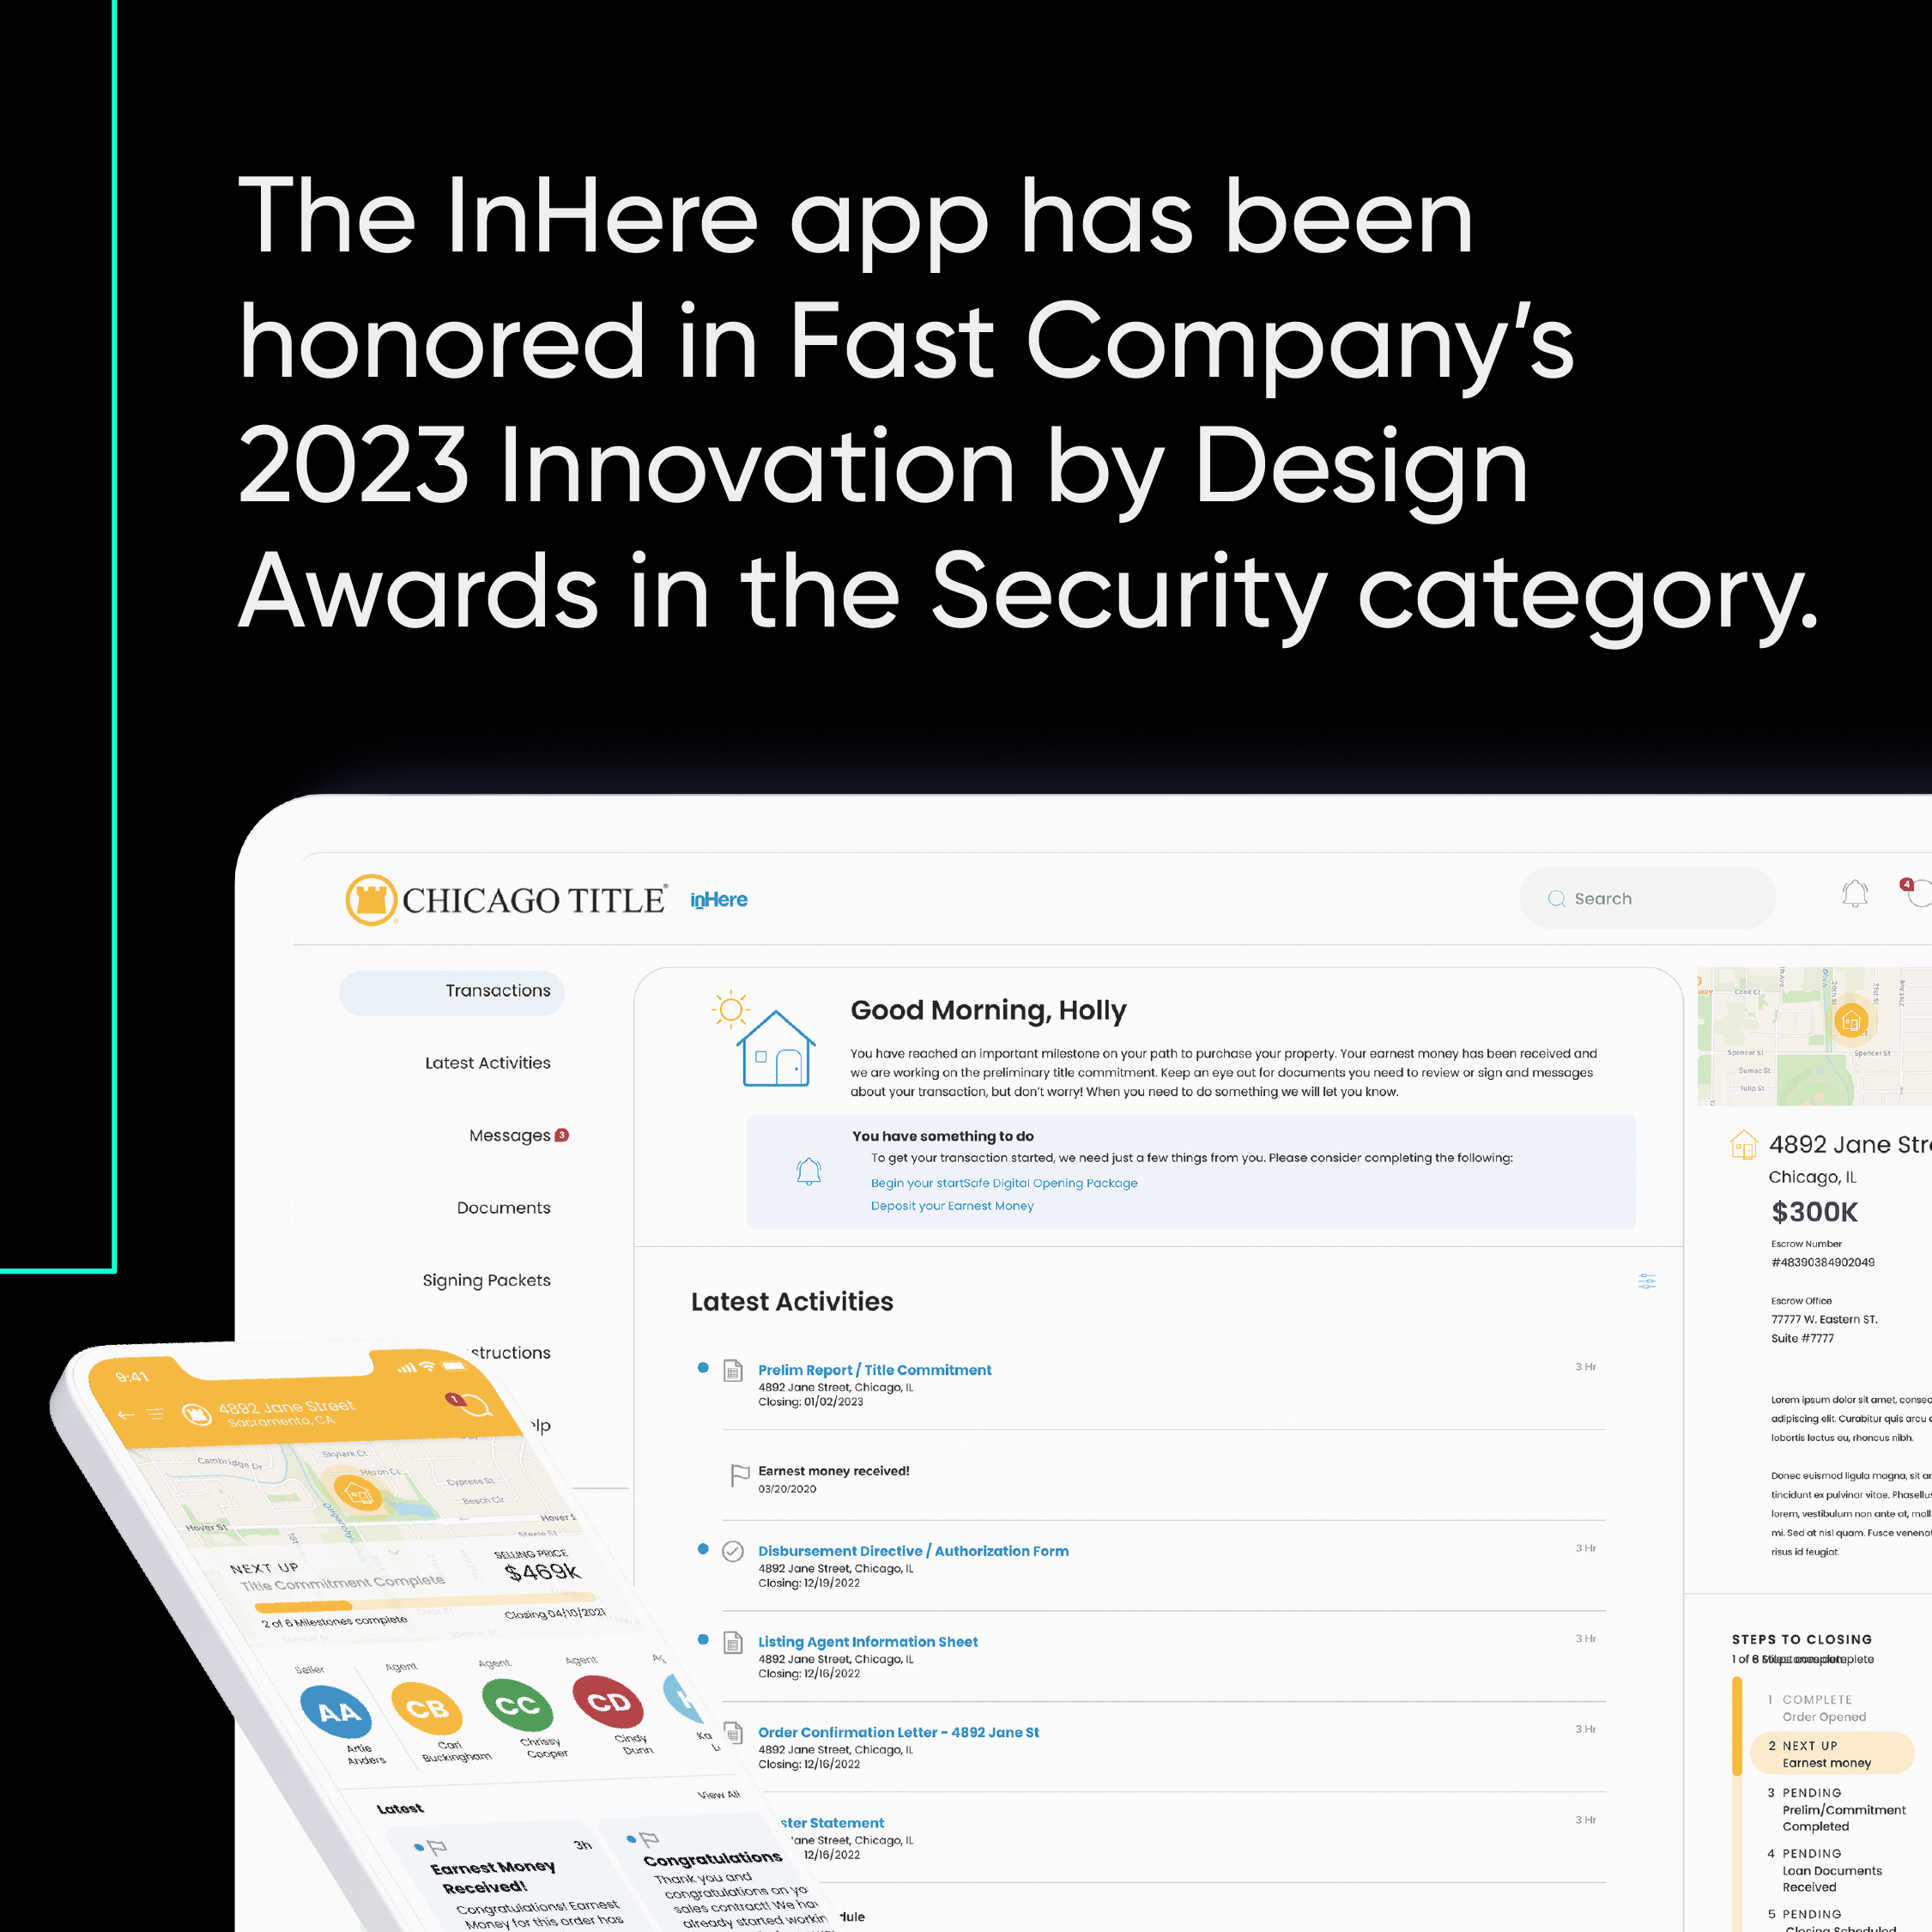 Fast Company's 2023 Innovation by Design awards honor the inHere app for its outstanding design.